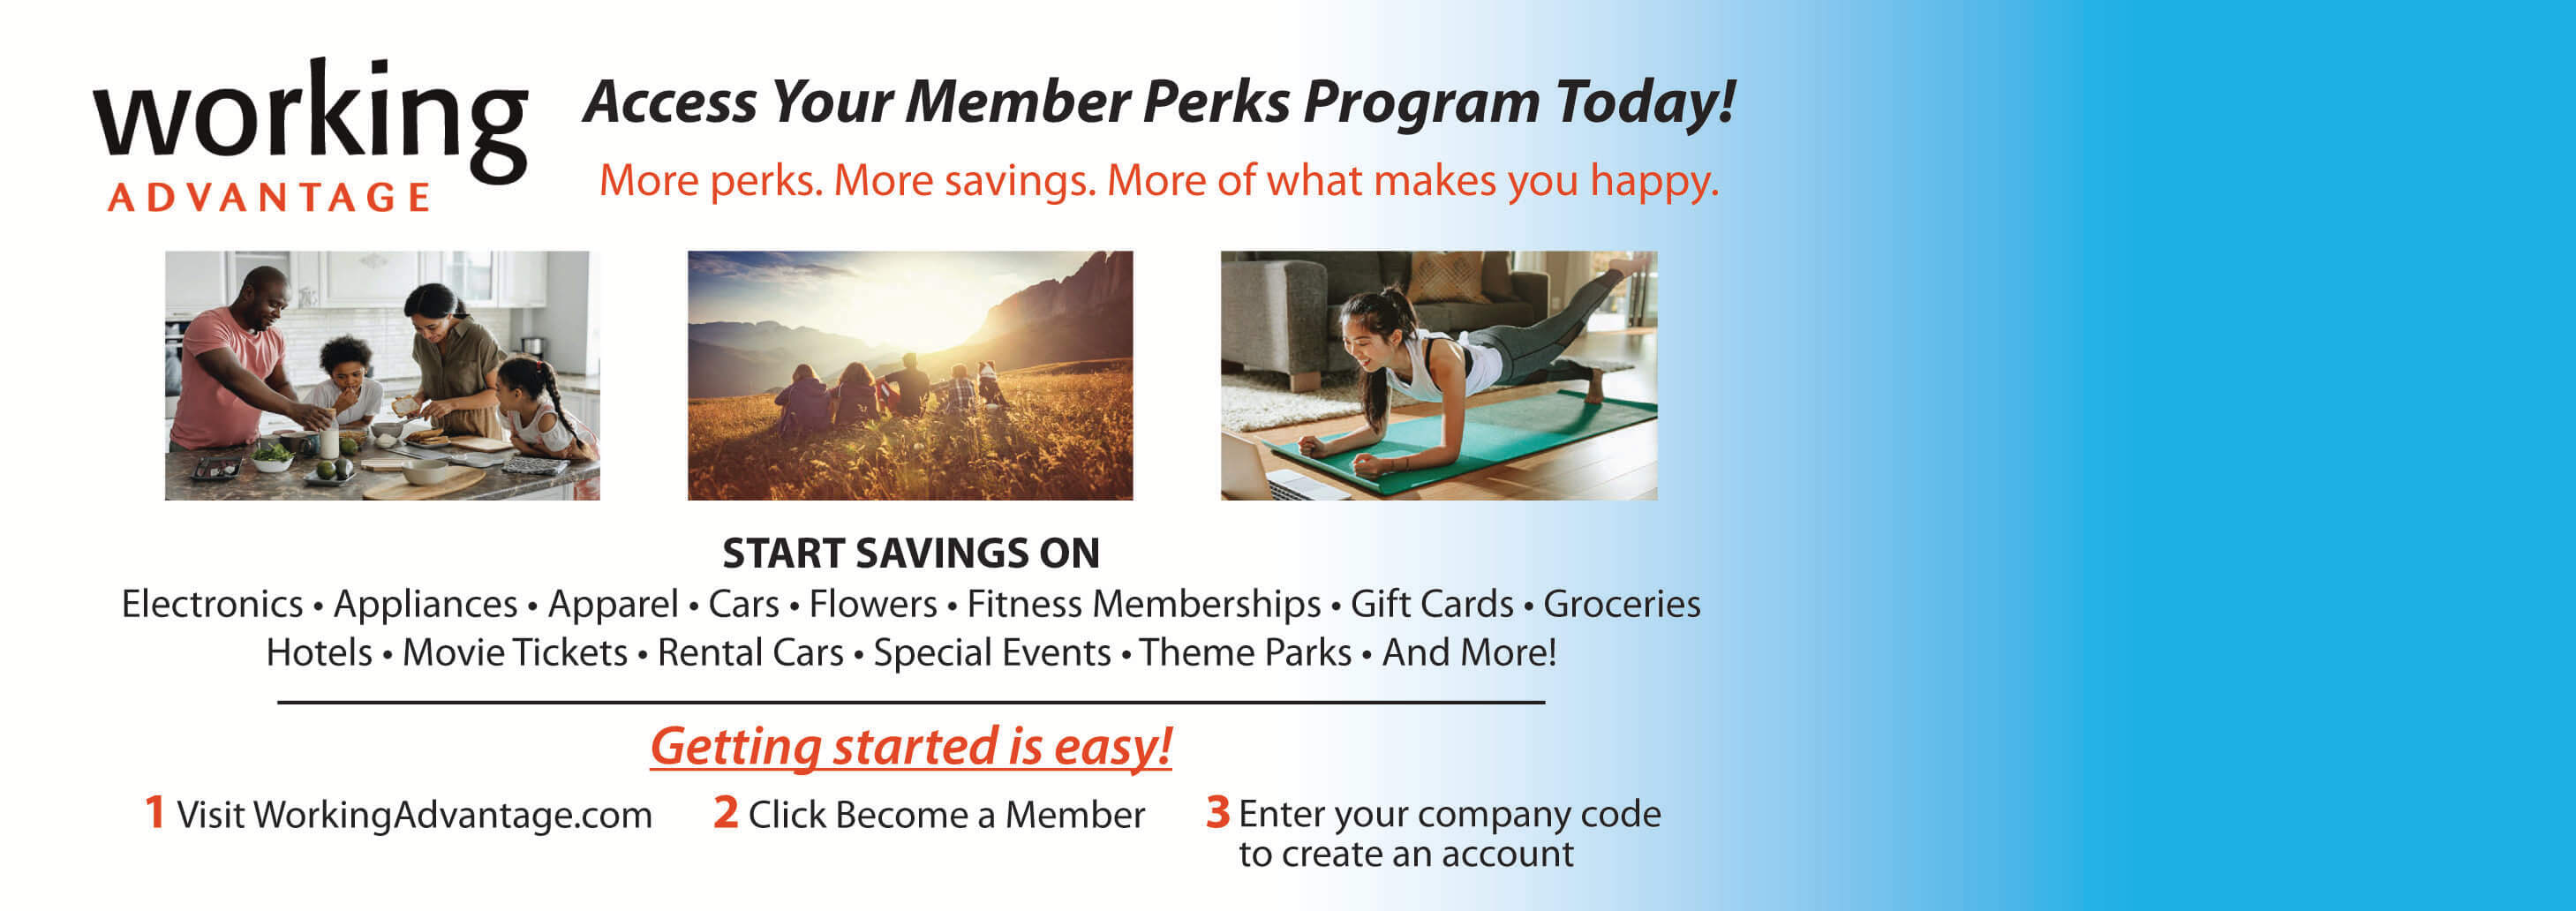 Workng Advantage Access Your Members perks program today! more perks. more savings. more of what makes you happy. start savings on electronics | appliances | apparel | cars | flowers | fitness memberships | gift cards | groceries | hotels | movie tickets | rental cars | special events | theme parks | and more! Getting started is easy! 1 Visit workingadvantage.com 2 click become a member 3 enter your company code to create an account